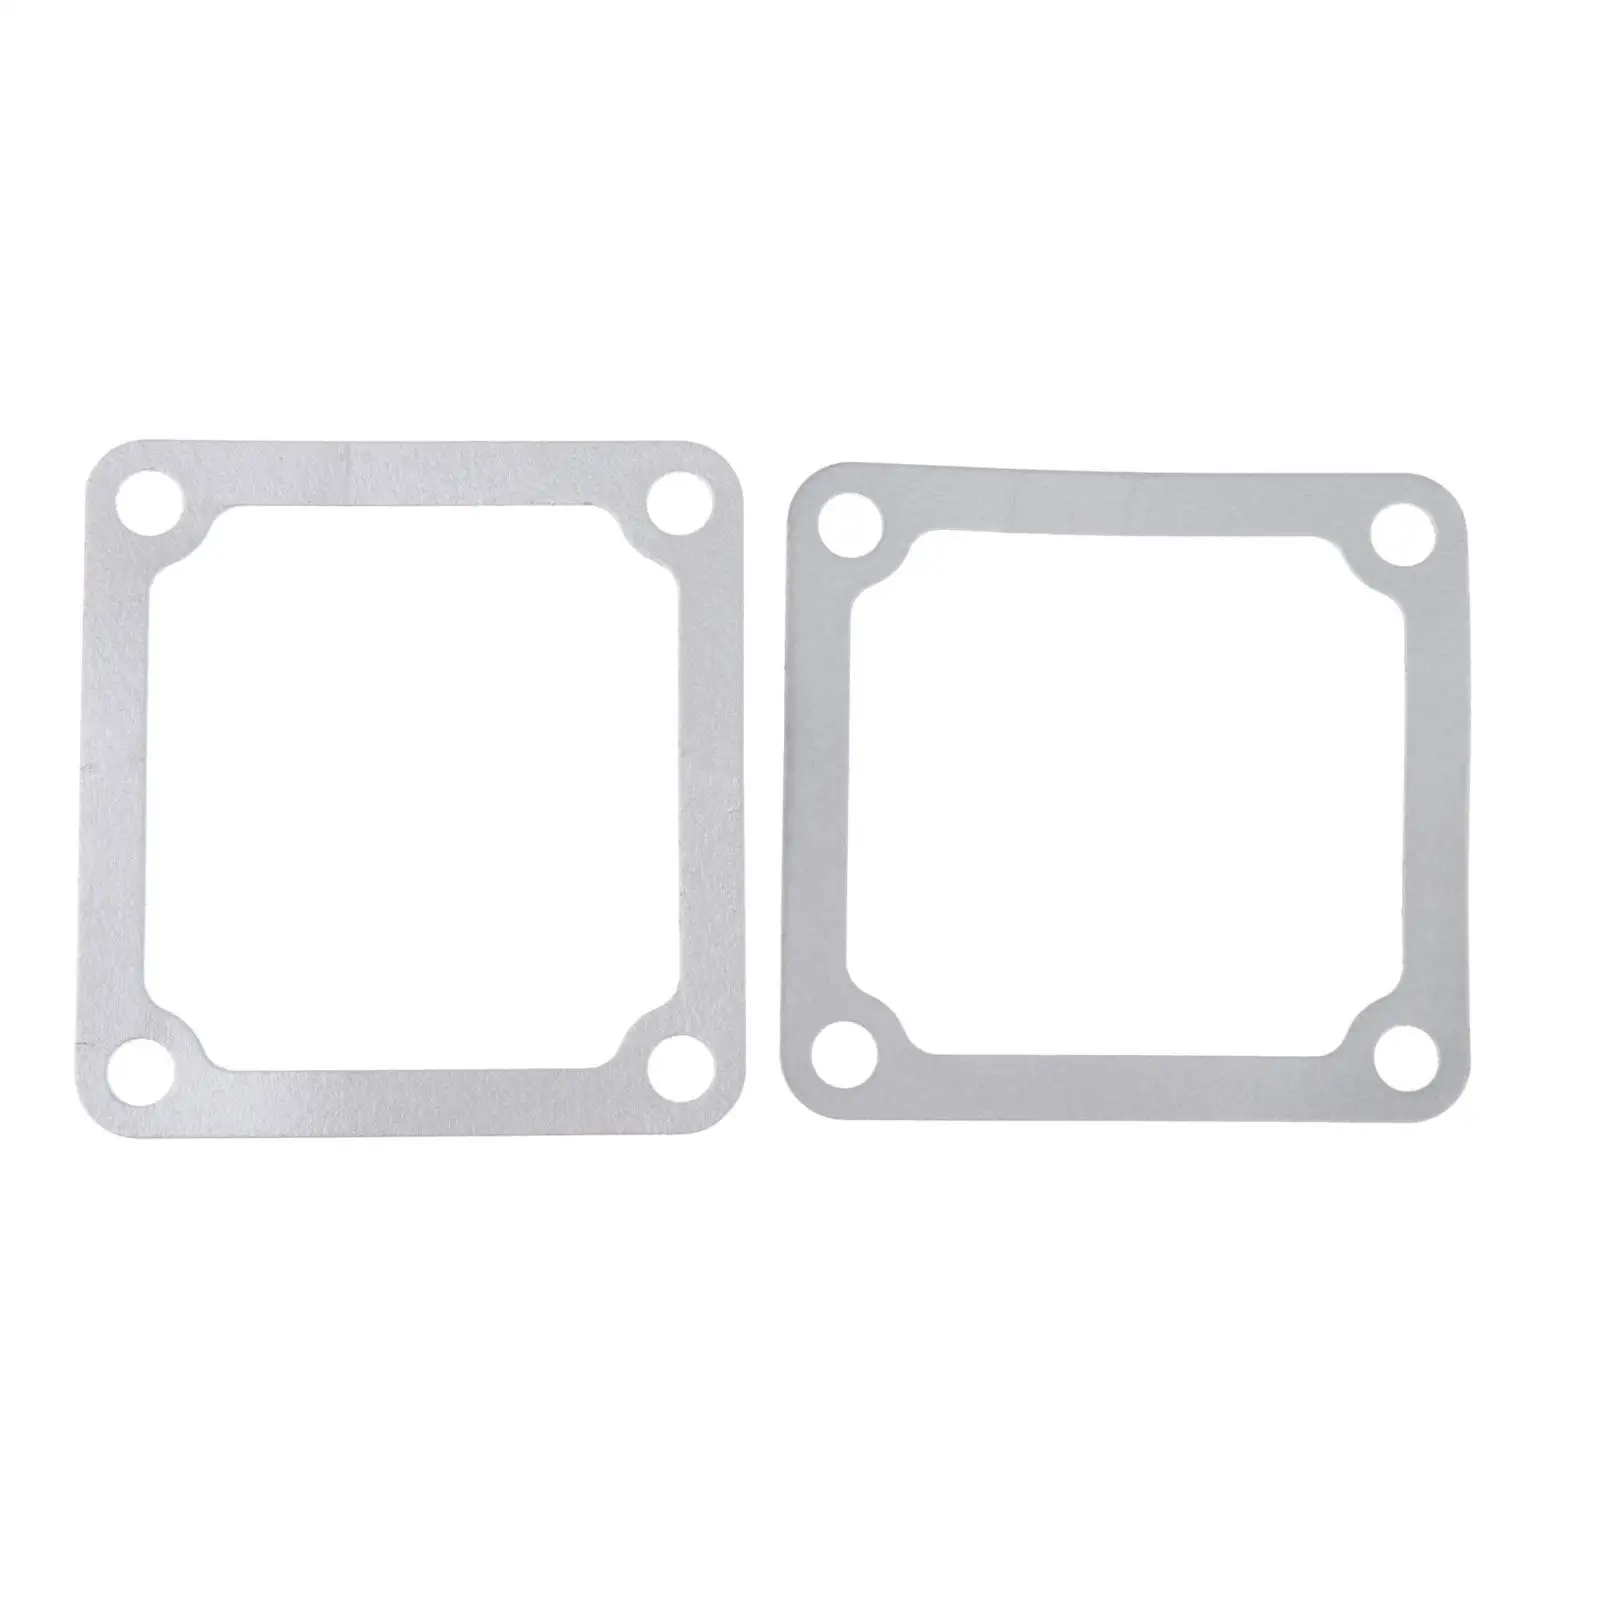 2x Intake Heater Grid Gaskets Strong Sealing for Replaces 5.9L Automobile Easy